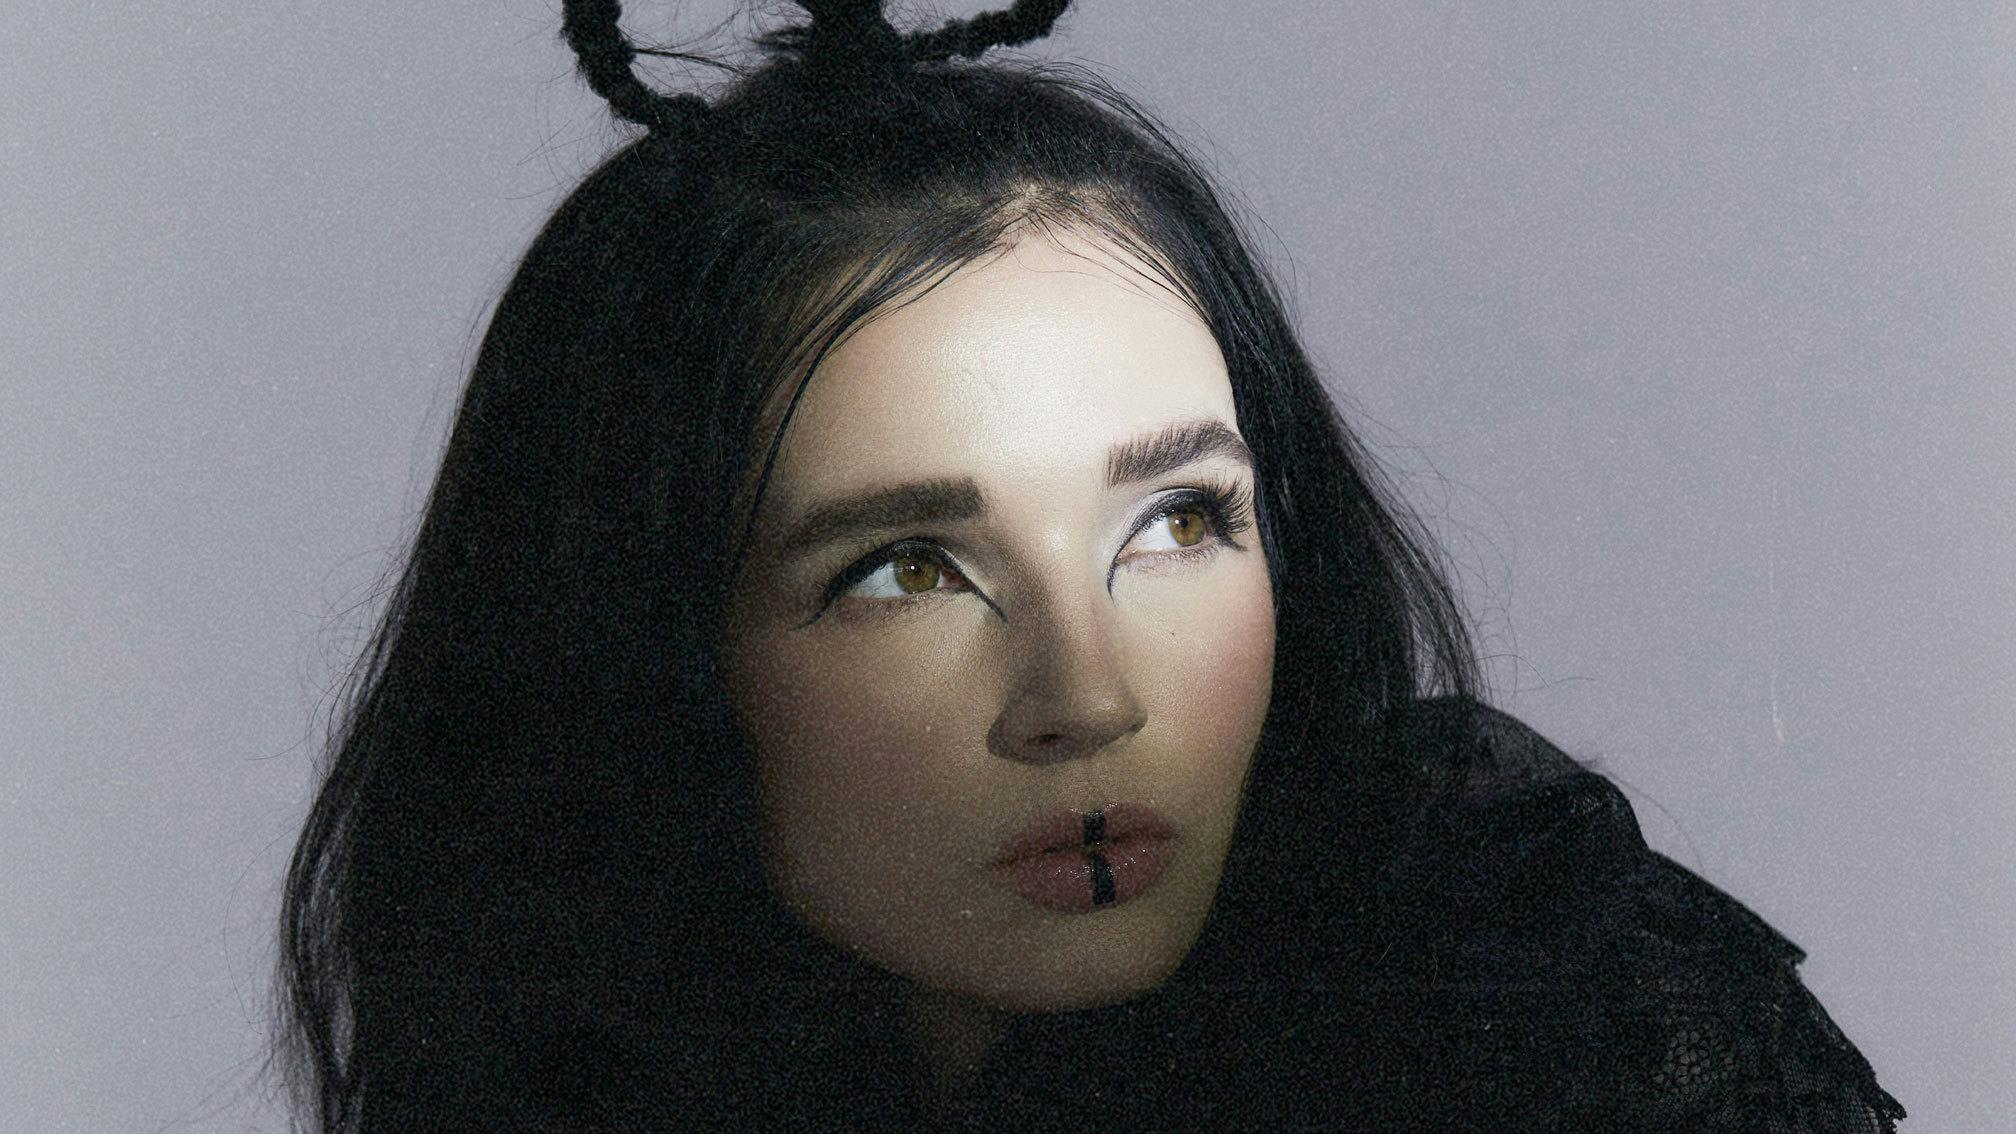 Poppy surprise releases new song, 3.14, about her cat